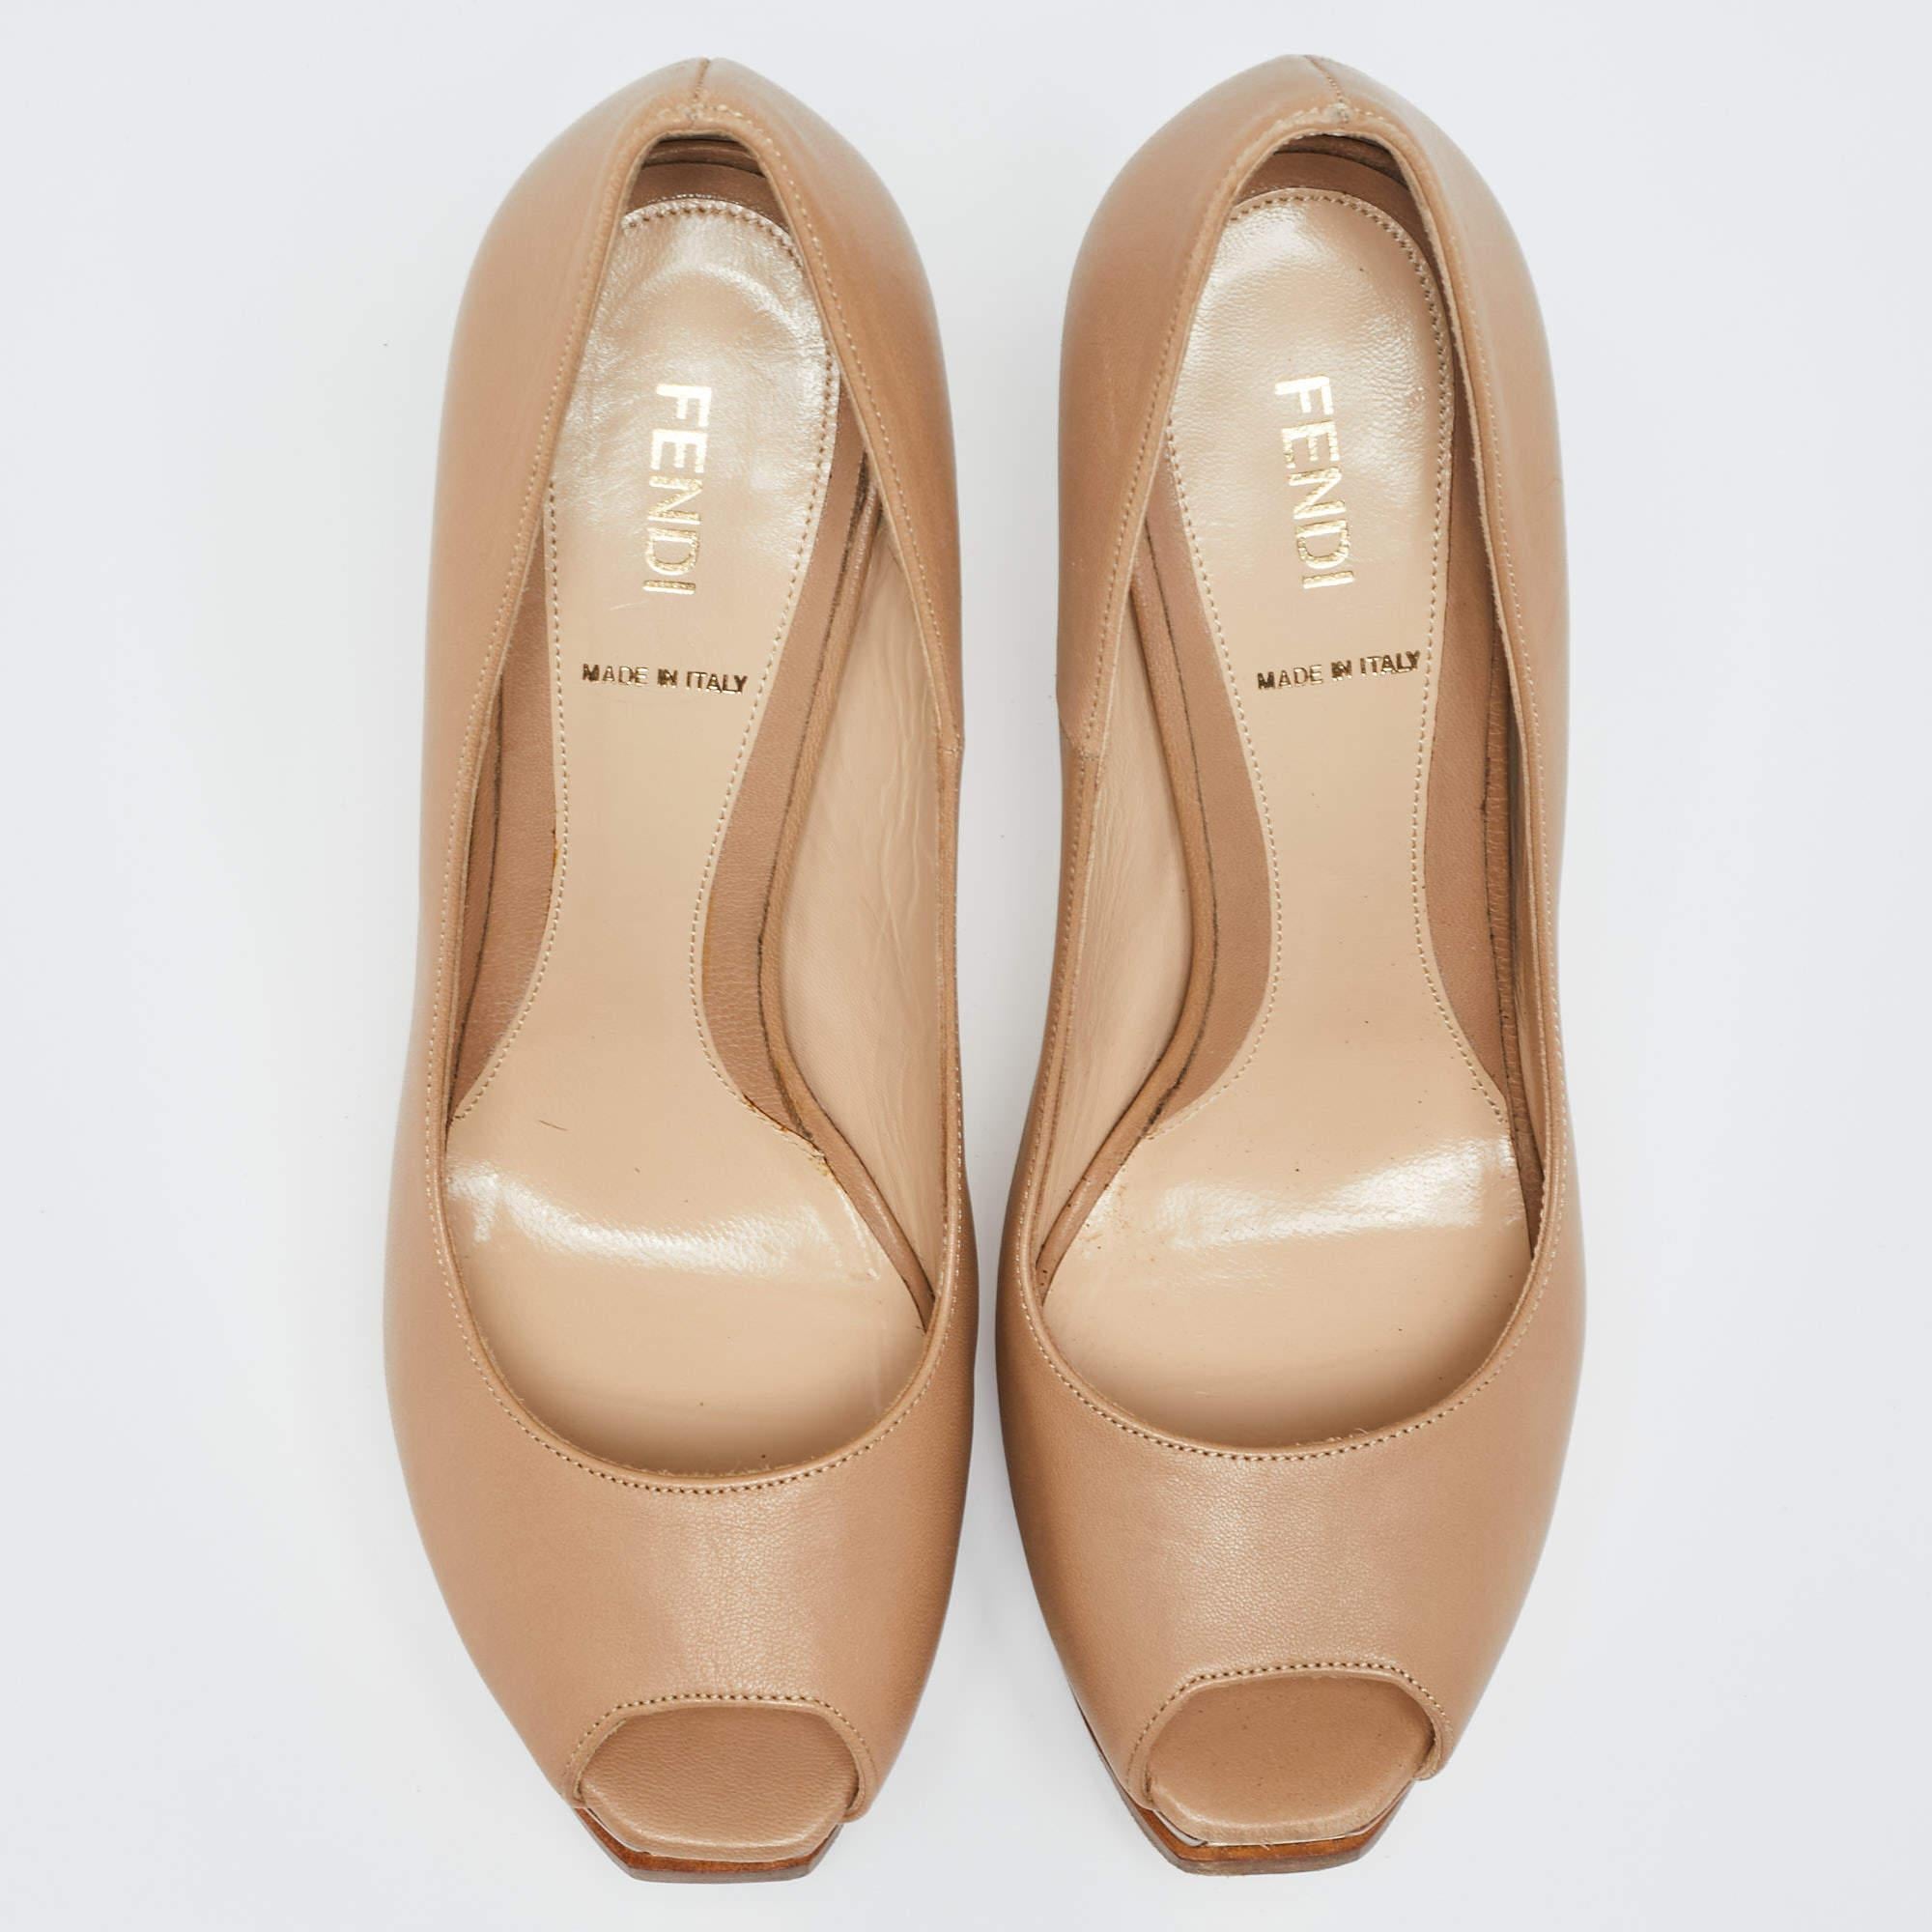 You will always be style-ready when you flaunt these pumps from Fendi. They have been crafted from beige leather in a peep-toe shape. Logo-detailed platforms and high stiletto heels complete this pair.

Includes: Original Dustbag

